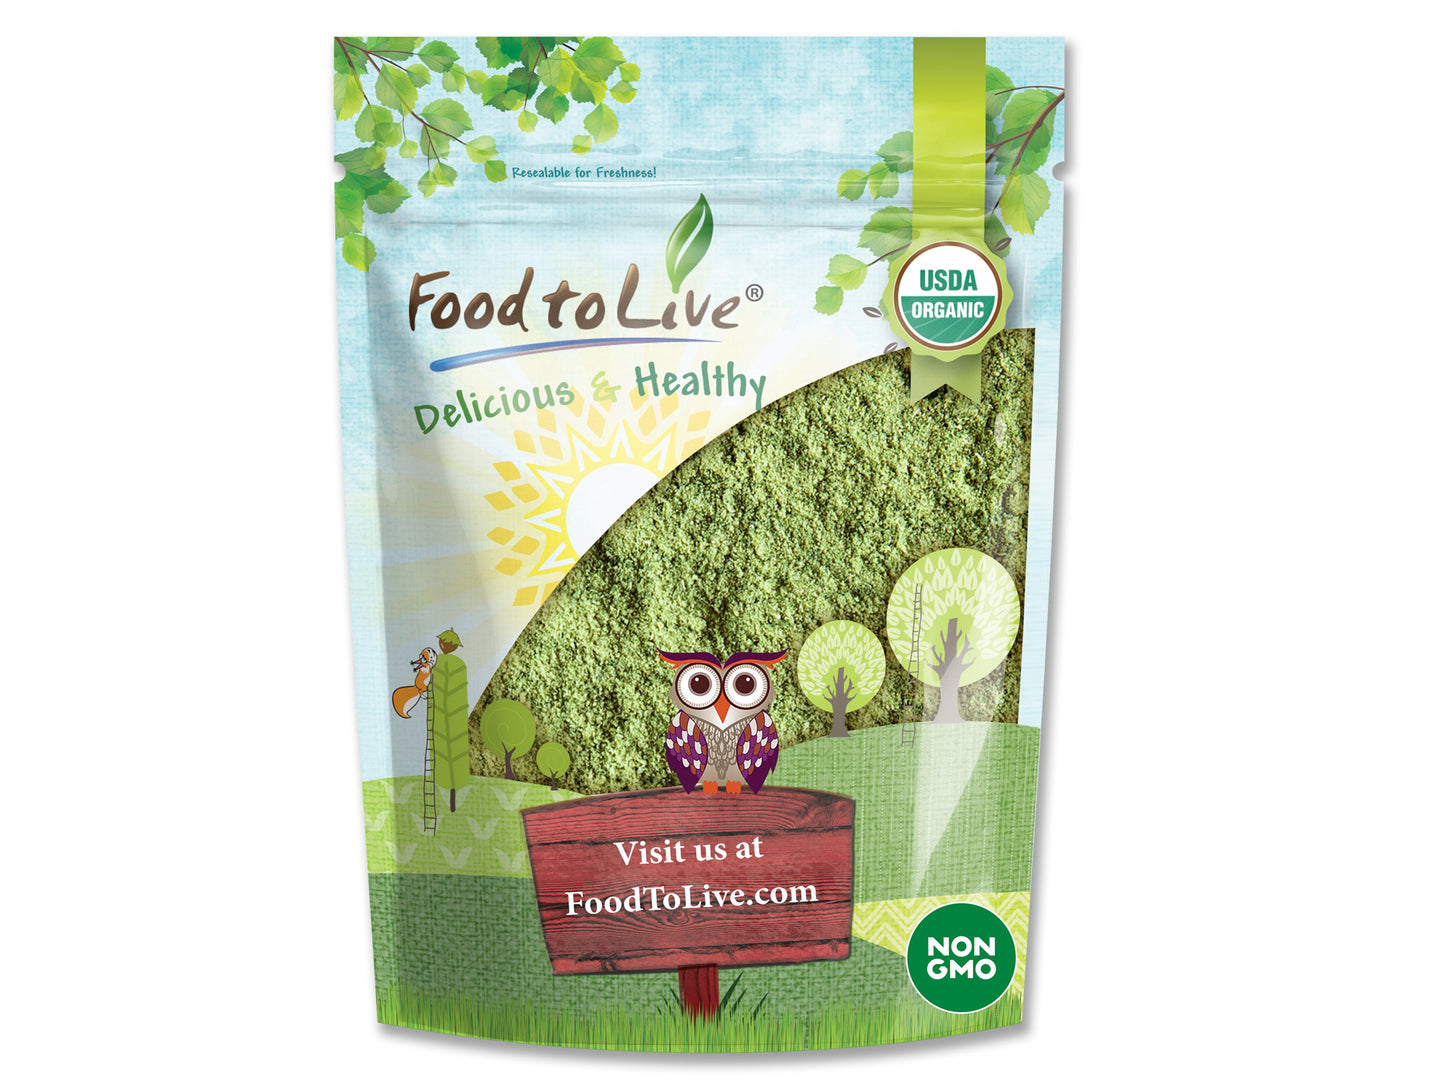 Organic Barley Grass Powder - Non-GMO, Ground Whole Raw Dried Young Leaves, Fine Milled, Vegan, Bulk, Great for Juices, Smoothies, Shakes, and Drinks. Good Source of Fiber and Protein